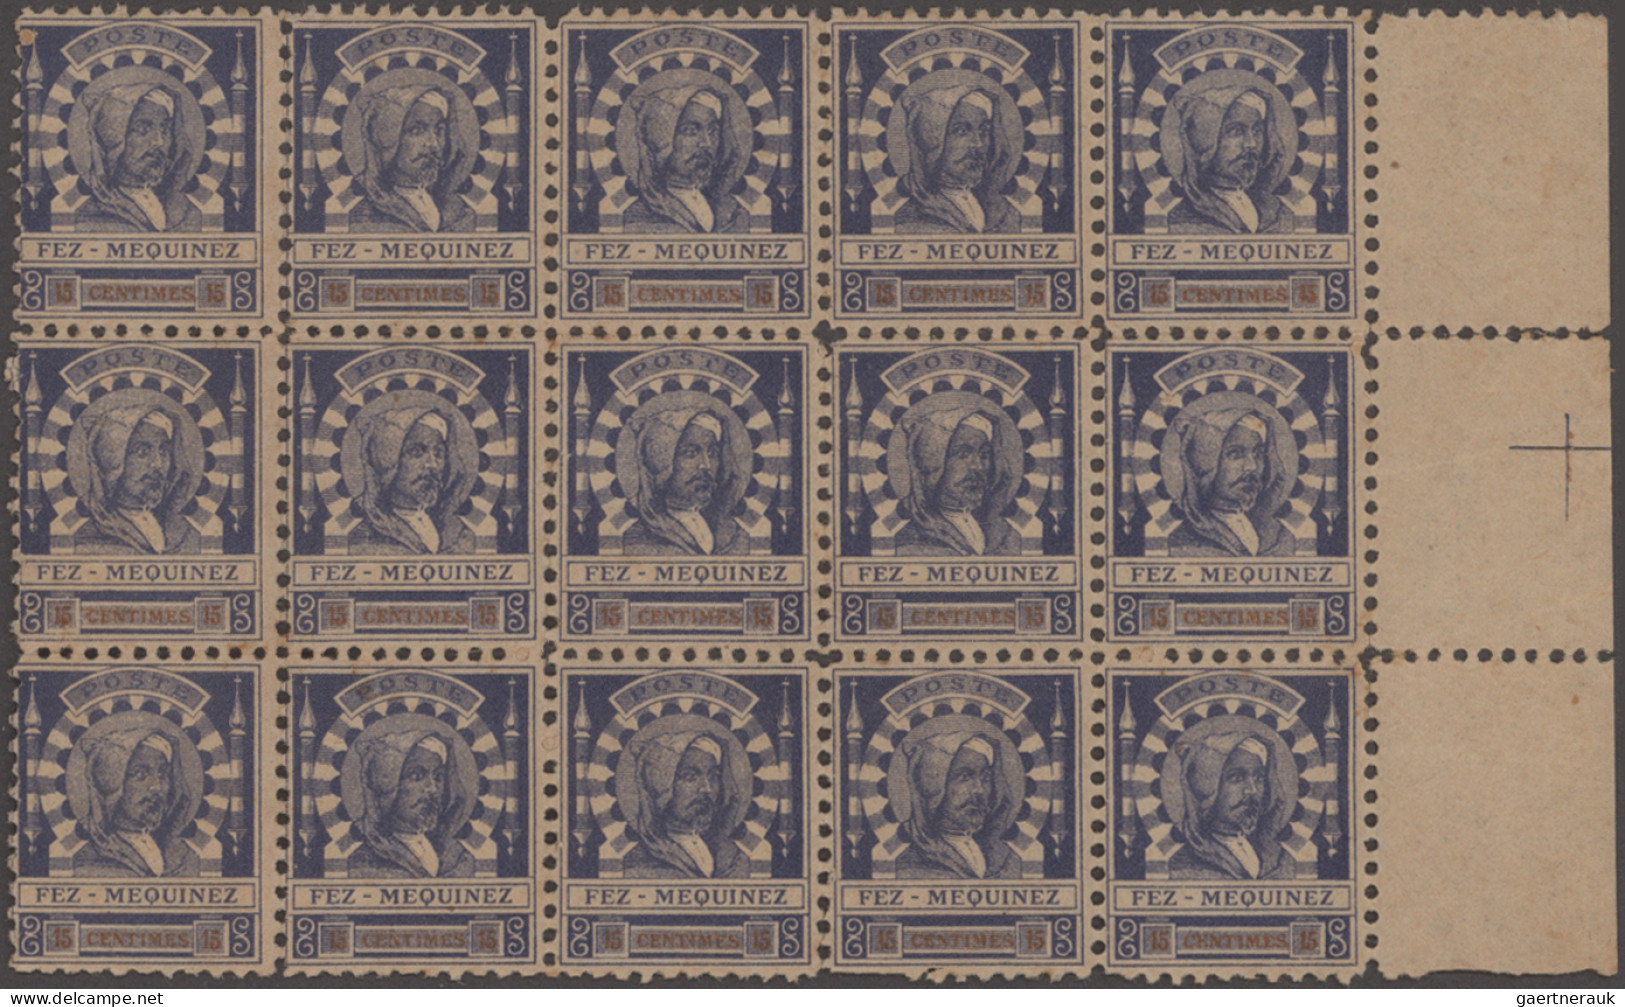 Morocco: 1900 Mogador-Agadir: Collection of about 230 mint stamps of all denomin